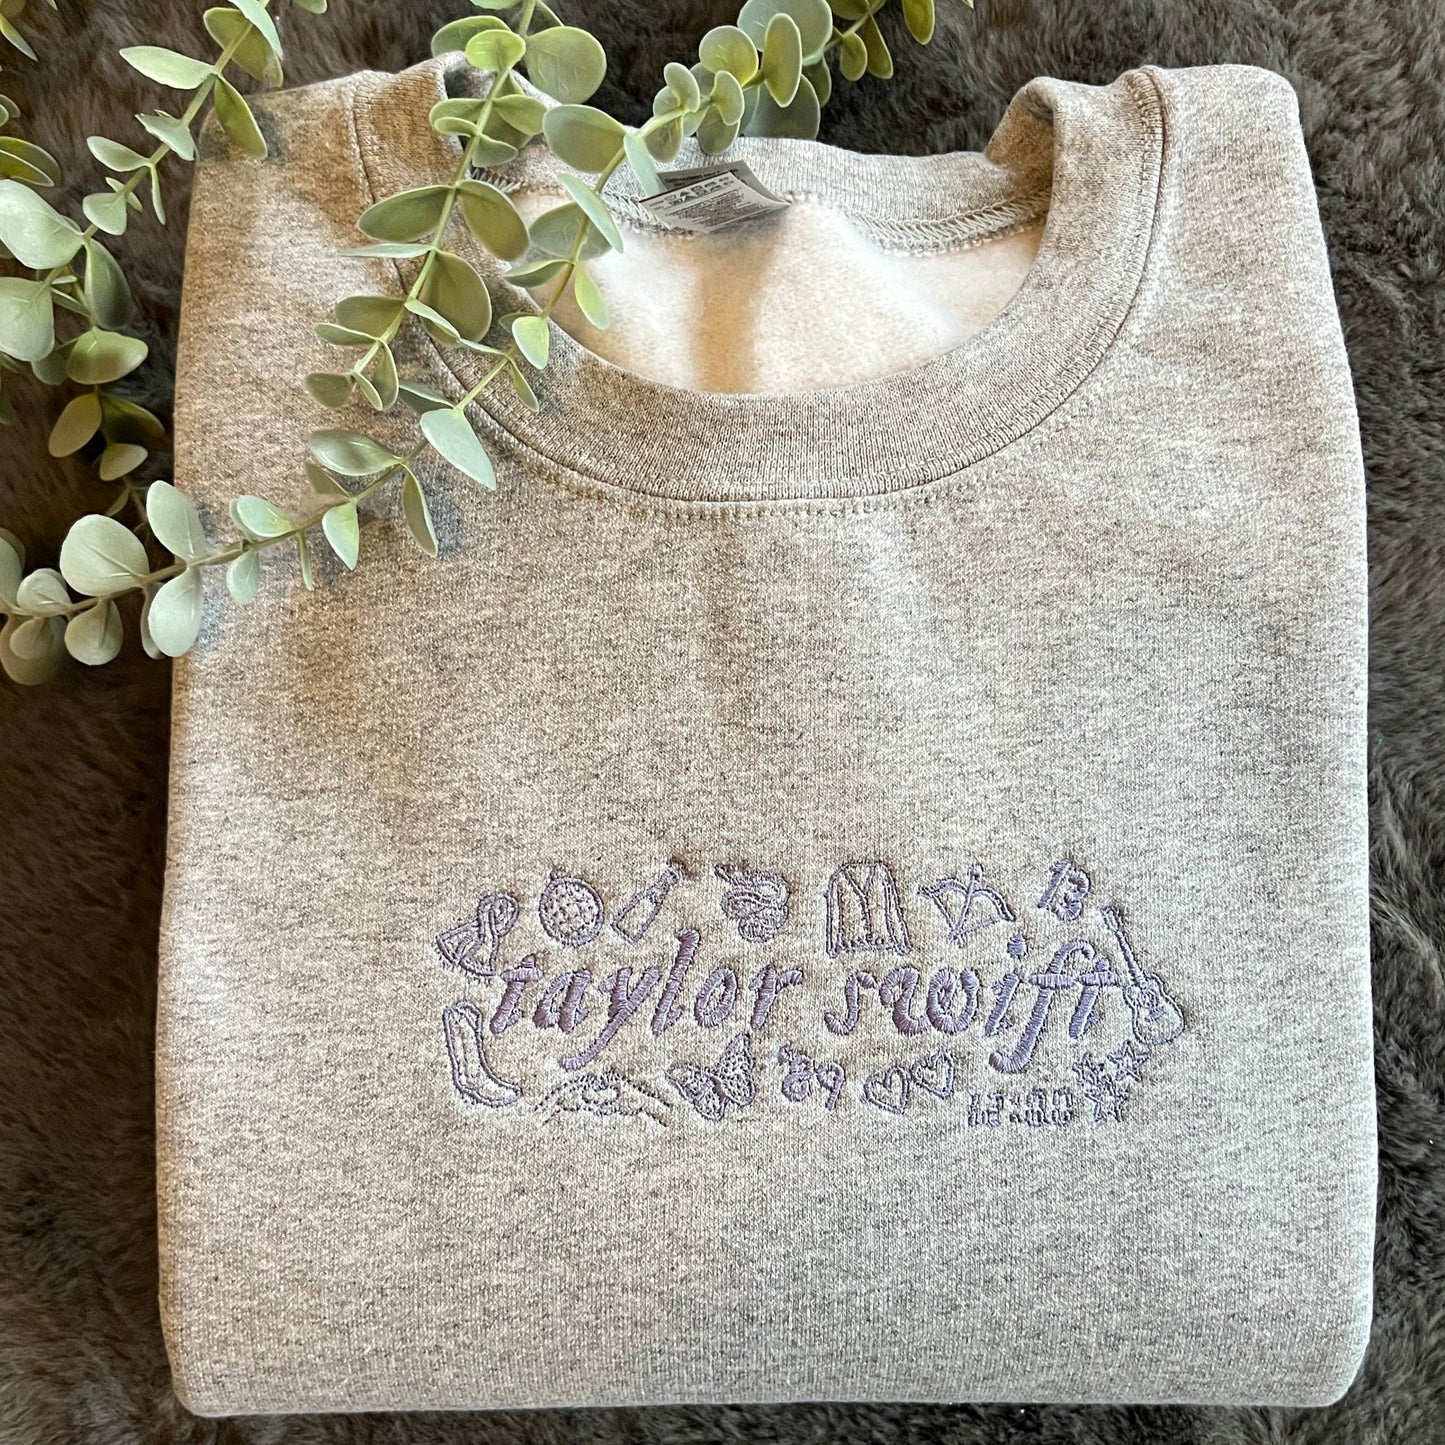 TAYLOR ICONS EMBROIDERED SWEATSHIRT